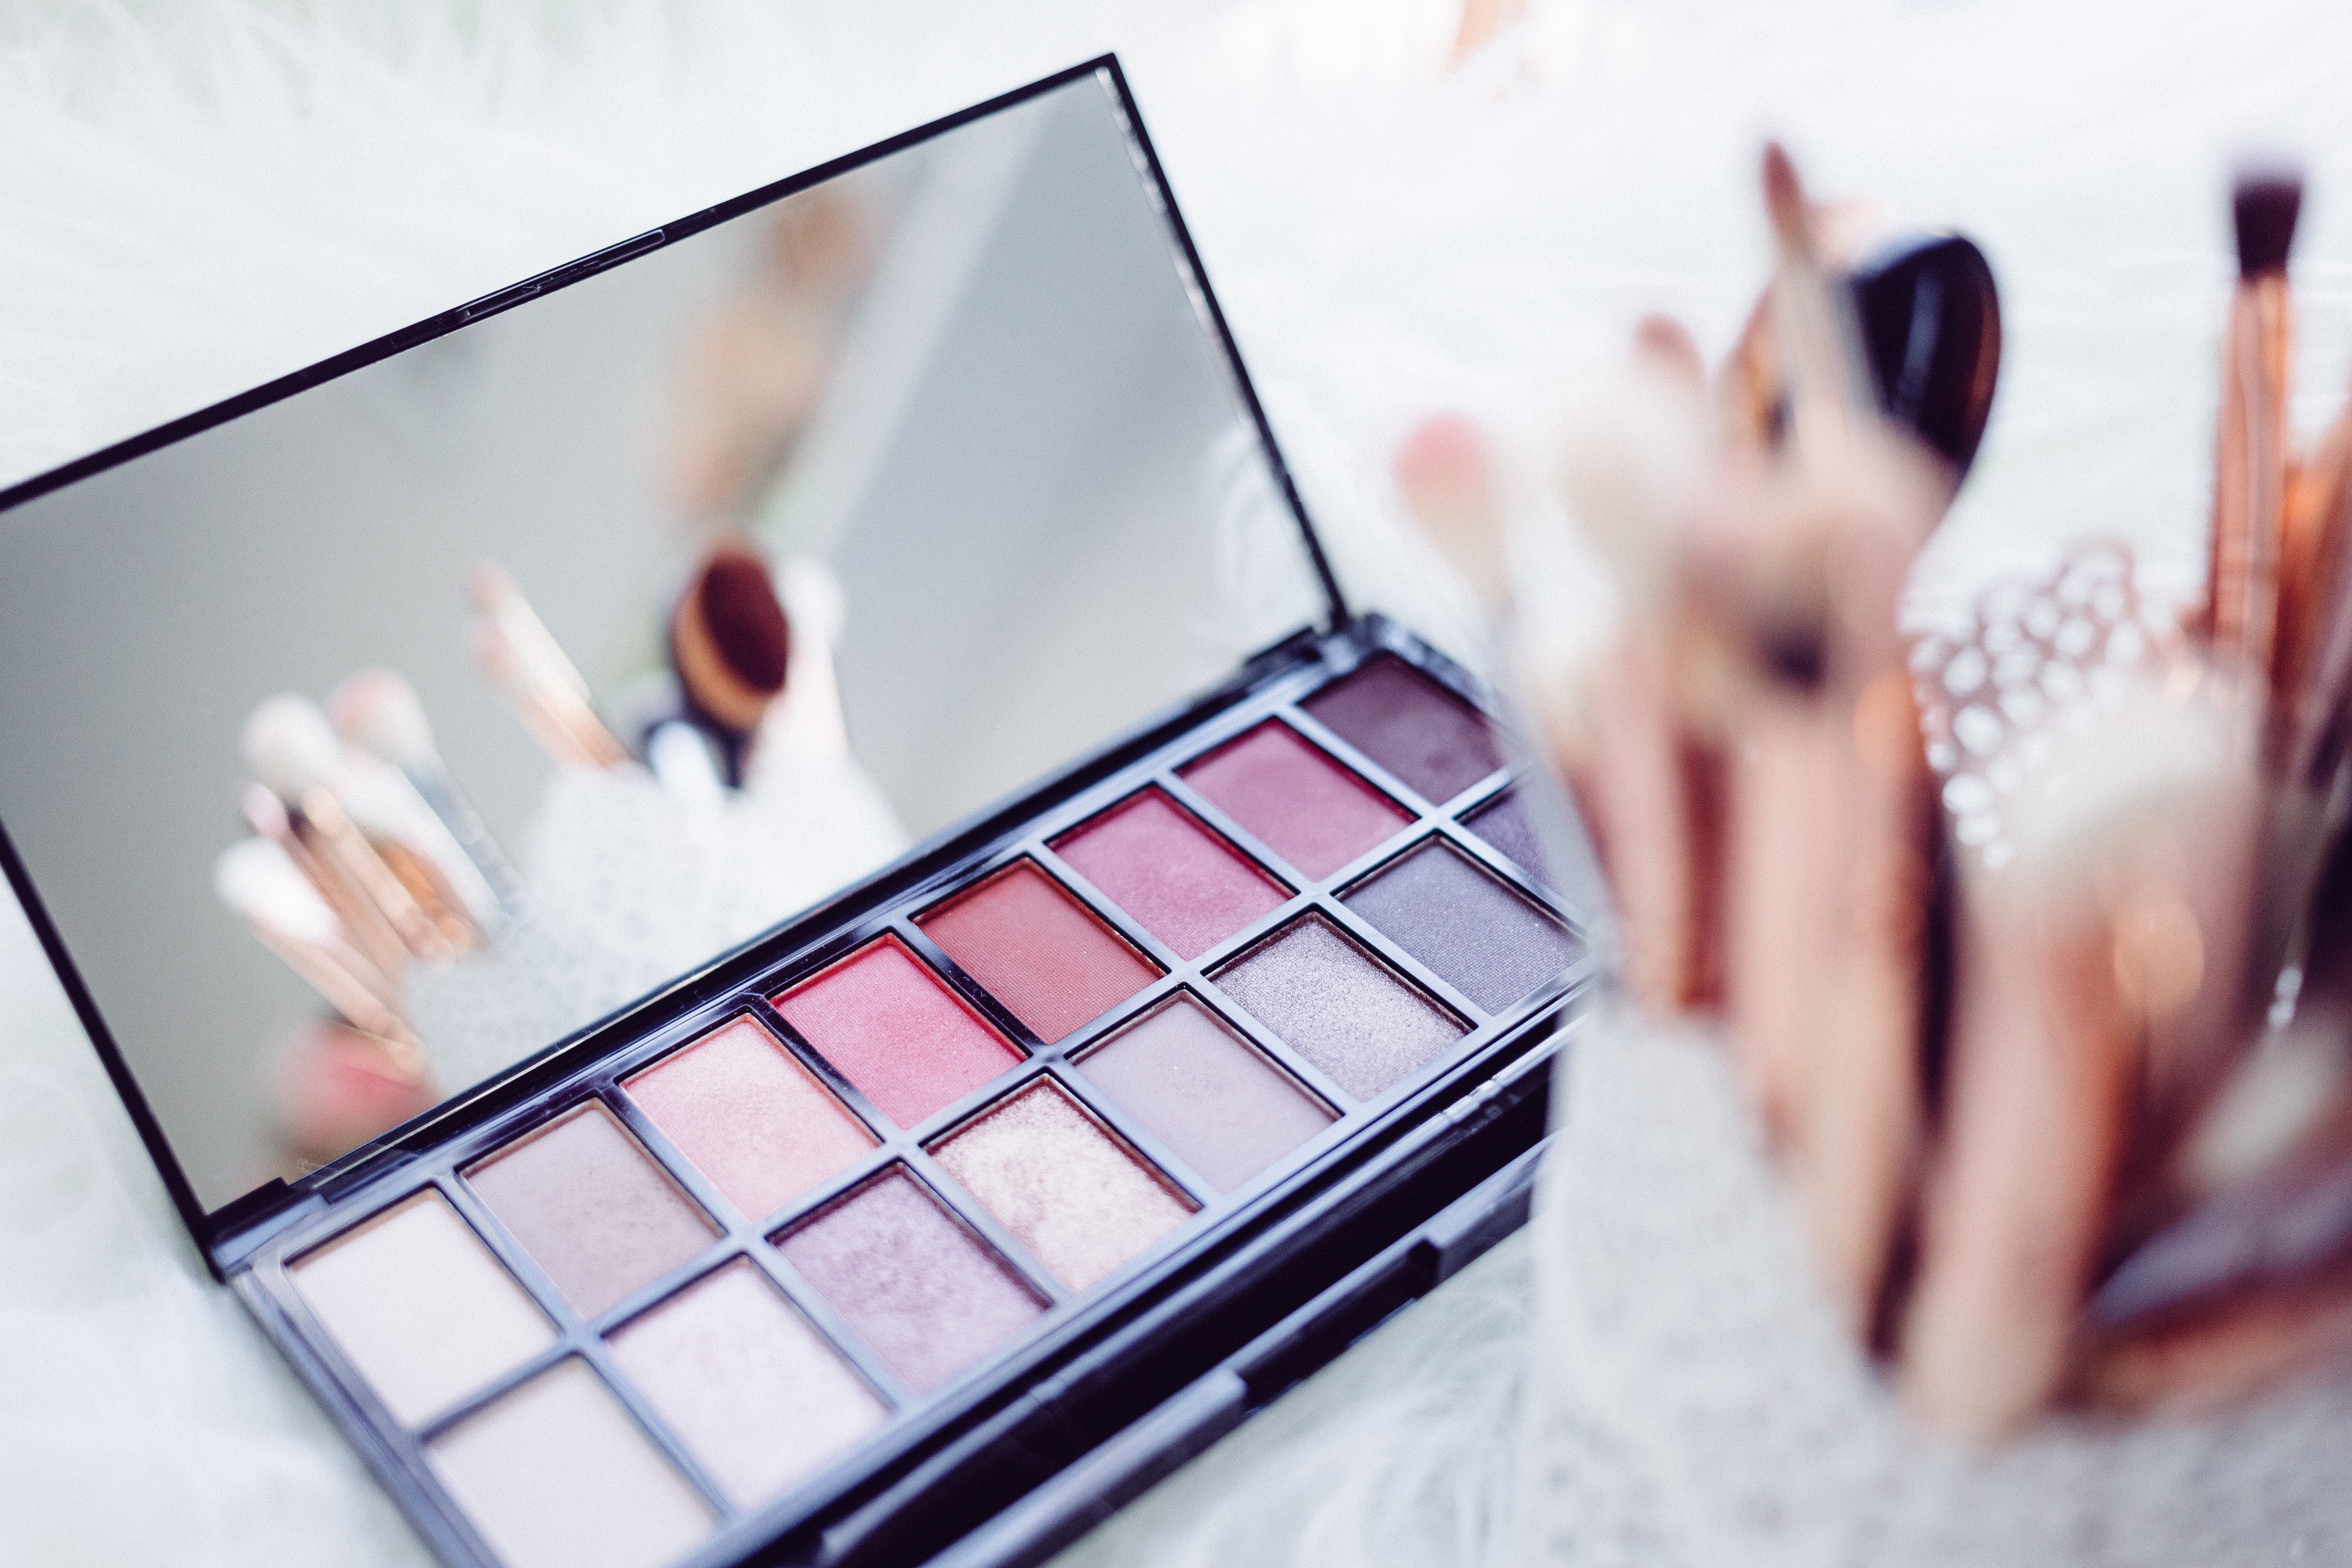 Find Hair And Makeup Artists in   Balcatta Get the best prices from 2,000+ of the most reviewed Hair And Makeup Artists  near Balcatta. Pick from mobile stylists or salons.